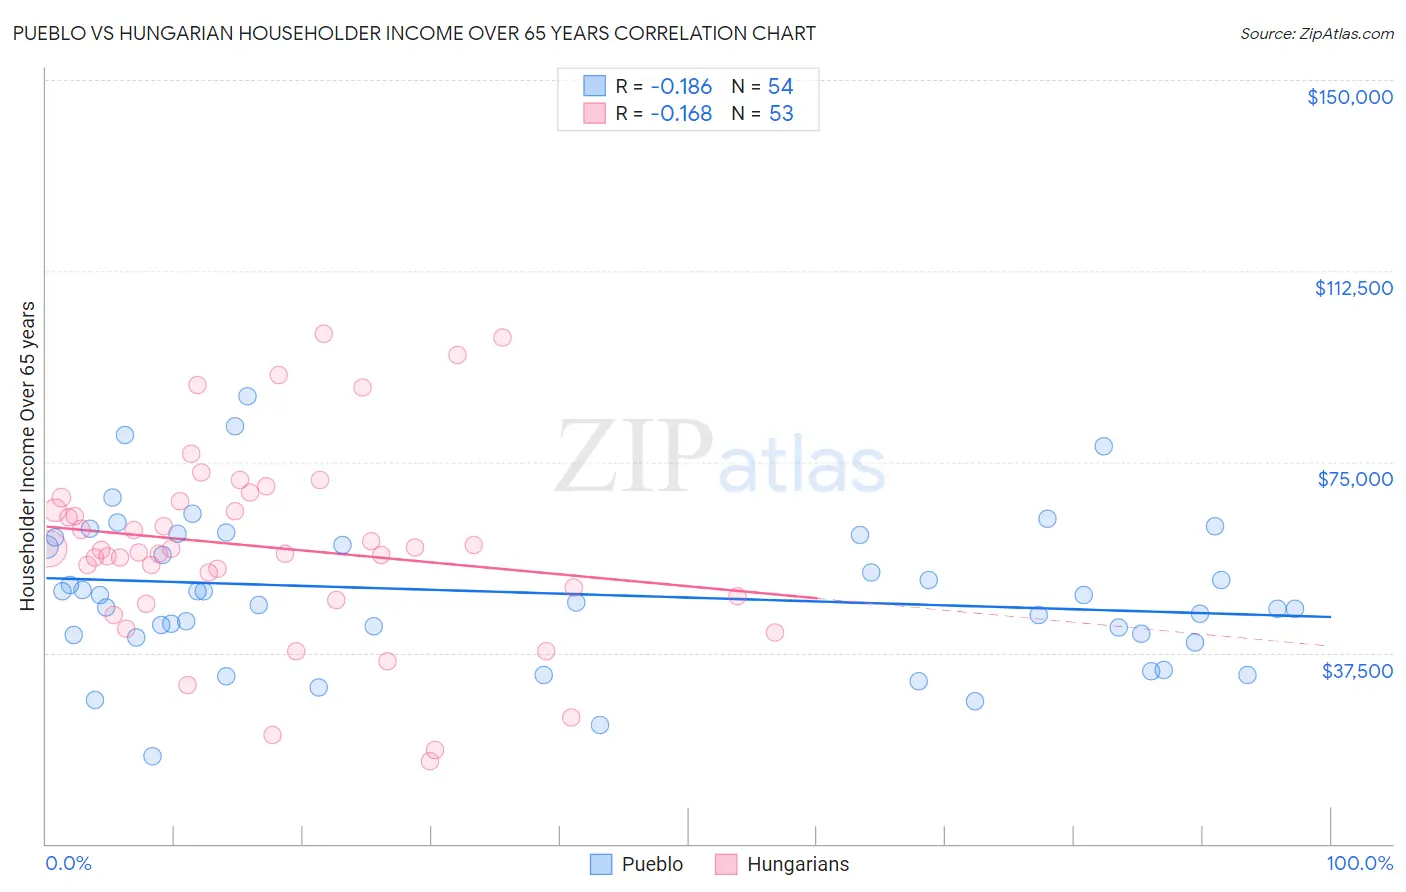 Pueblo vs Hungarian Householder Income Over 65 years